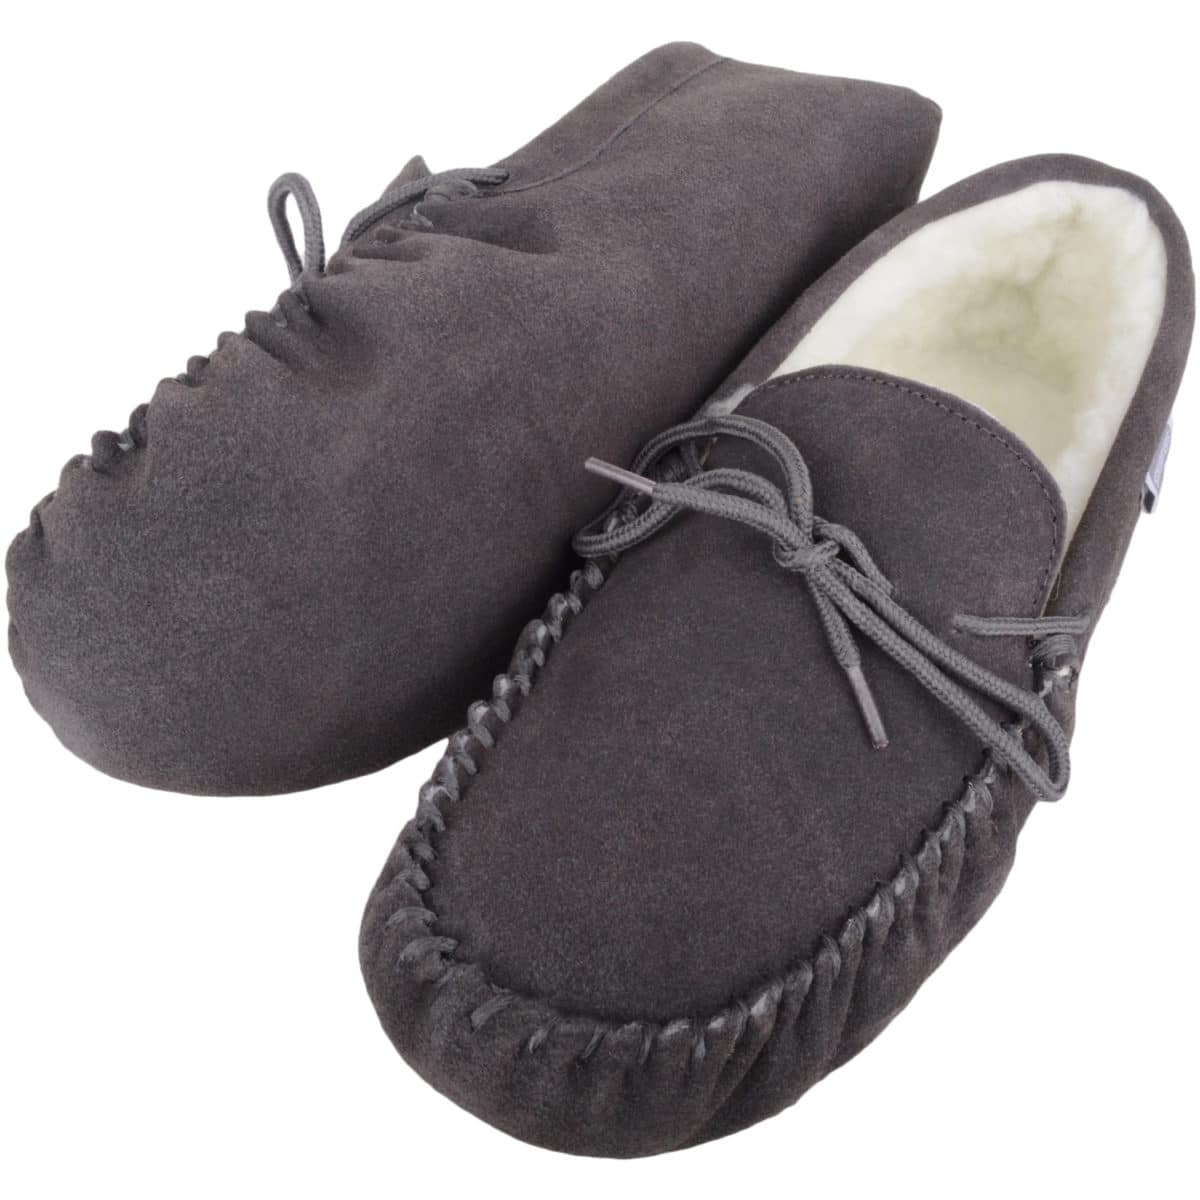 Moccasin Slippers – Wool – Suede Sole 